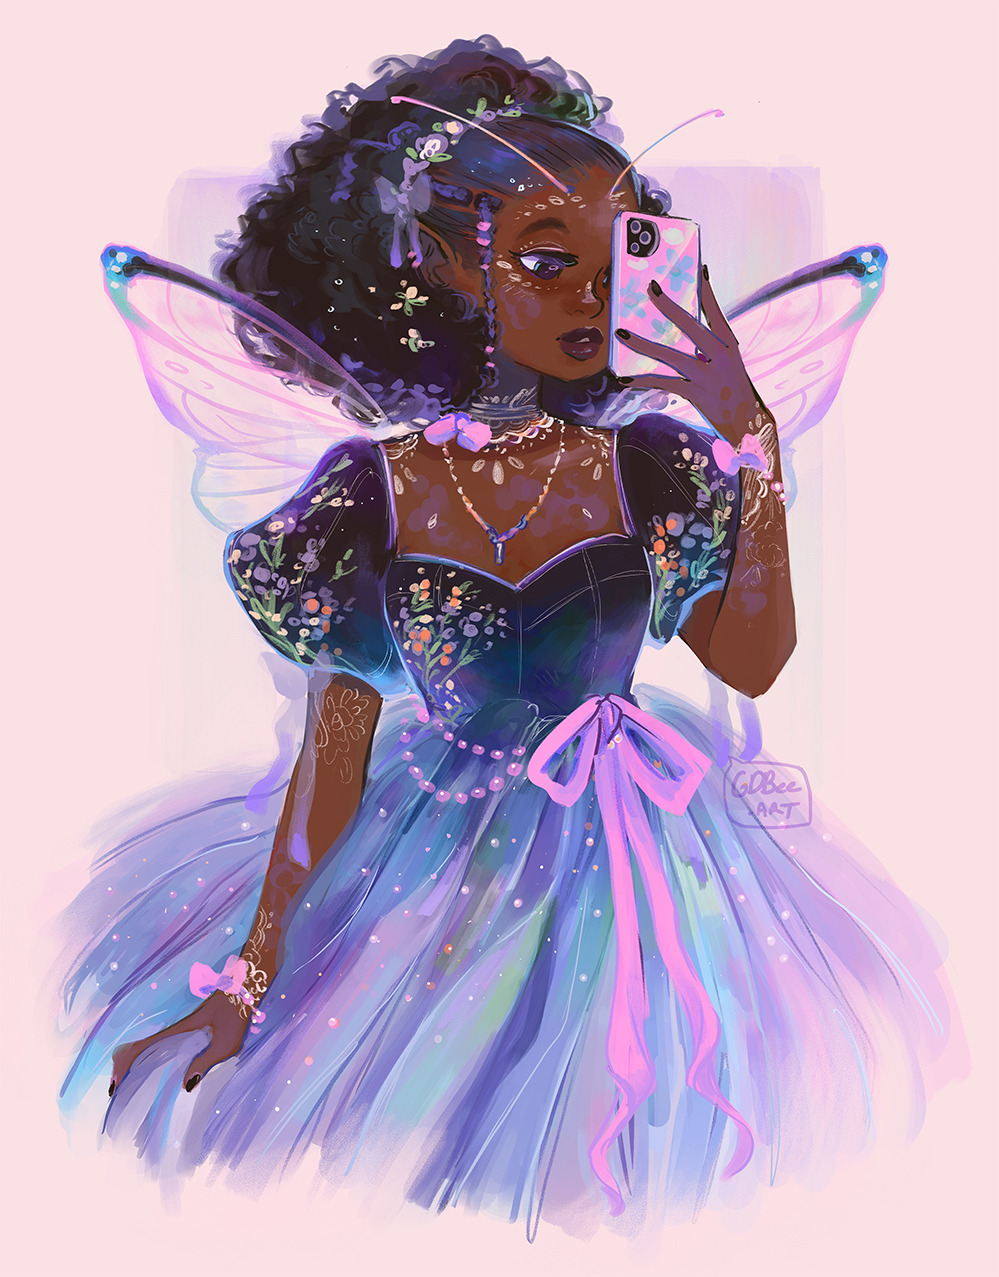 Illustration of a fairy holding her dress and taking a selfie. She is looking at her pink phone. Her skin is dotted purple with some light colored tattoos. Her hair is slicked back into a bun with one braid. The dress has dark sleeves with a light ombre towards the bottom, and dotted with floral appliques and pearls. Her wings are pink and dark blue. Painted in photoshop, 2024, gdbee